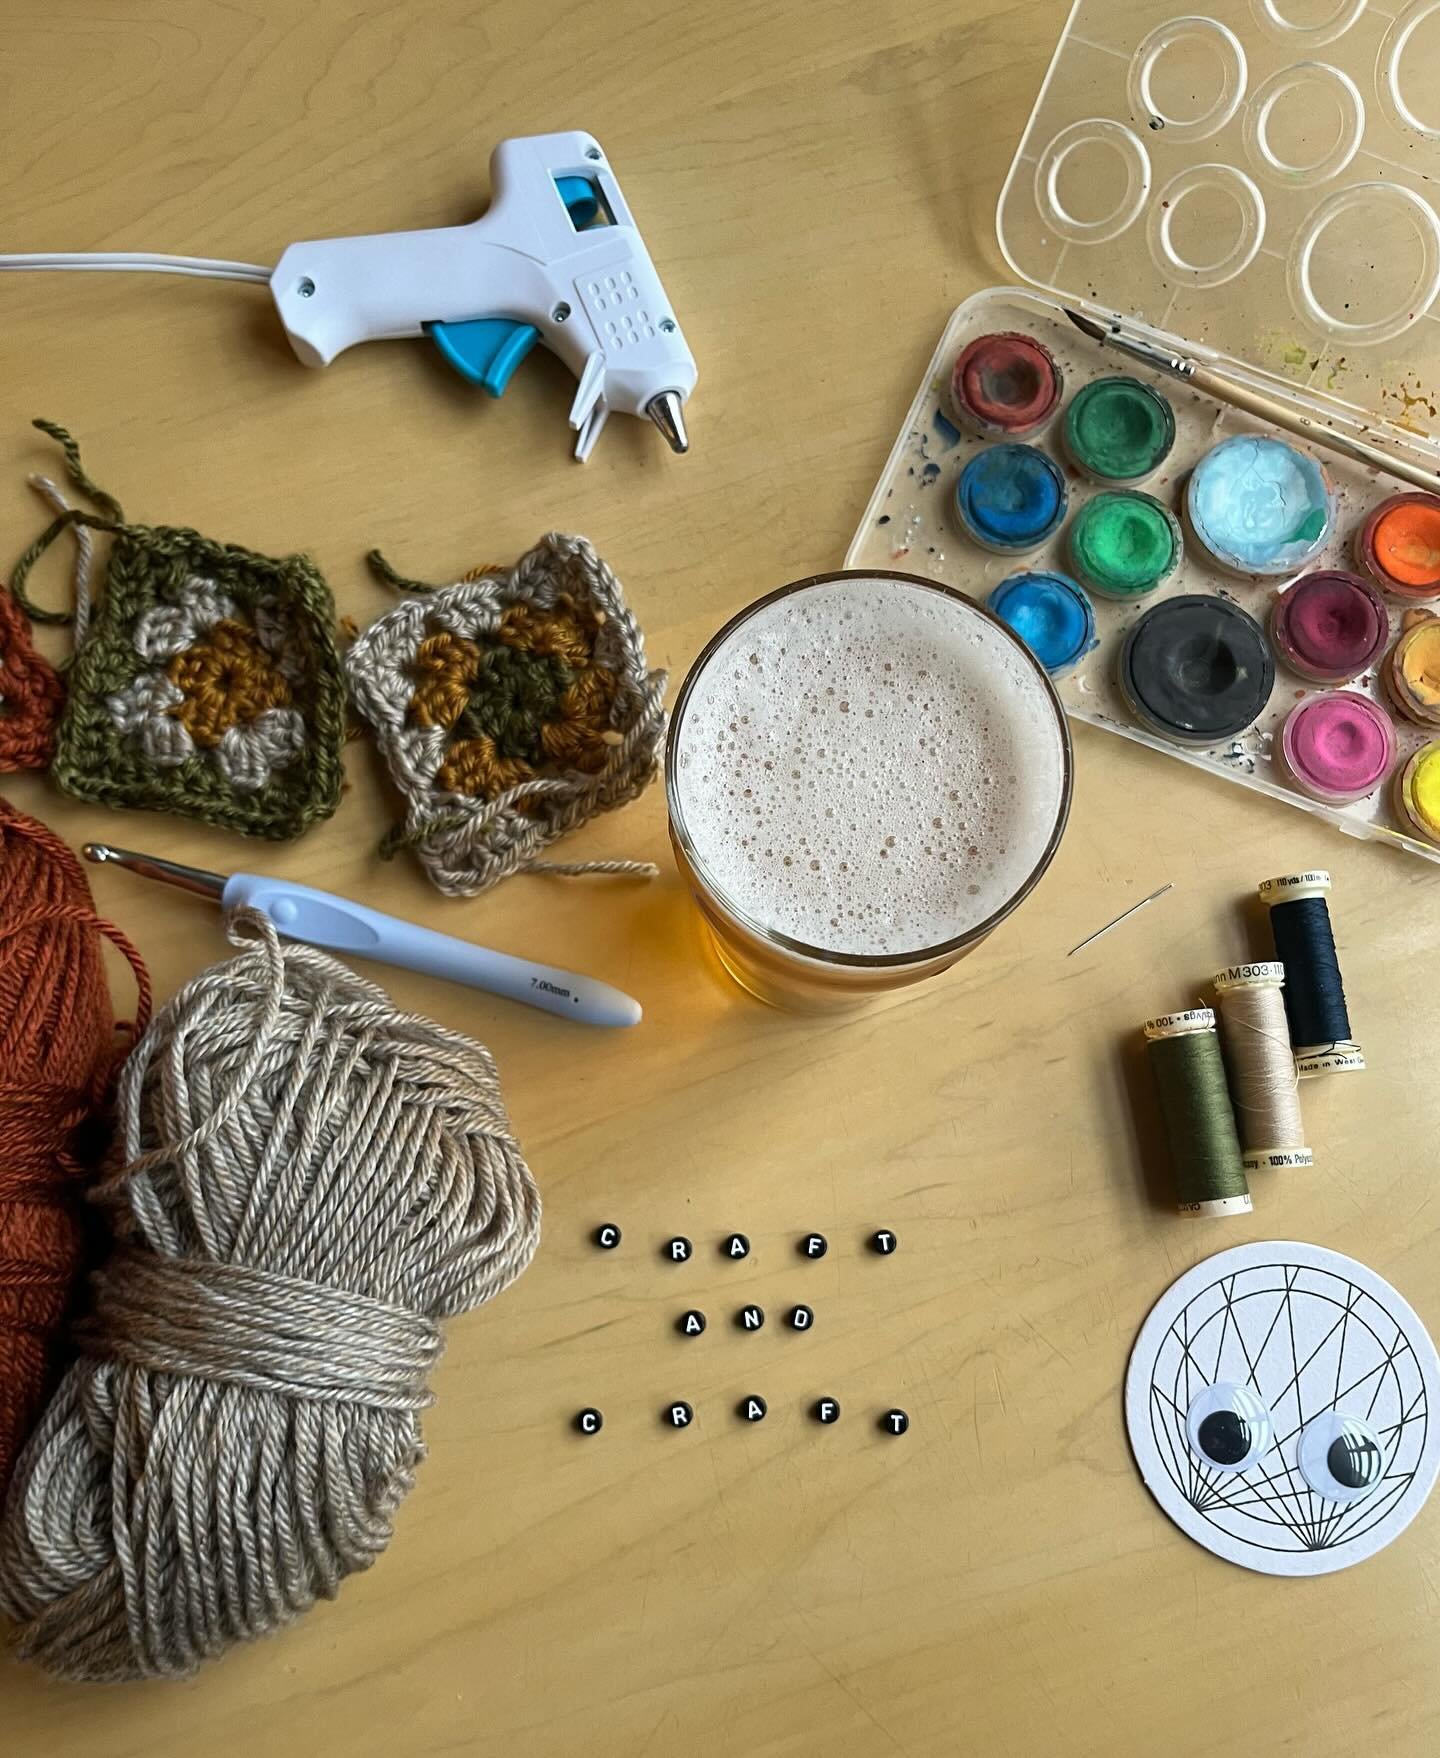 Makers rejoice! It's Craft &amp; Craft again this Sunday 🧵🎨🪡✂️

Bring your WIP (work in progress),grab a pint, and join other makers and crafters in the mezz from noon-3 for some social crafting! Meet fellow makers in the area, chat about your pro